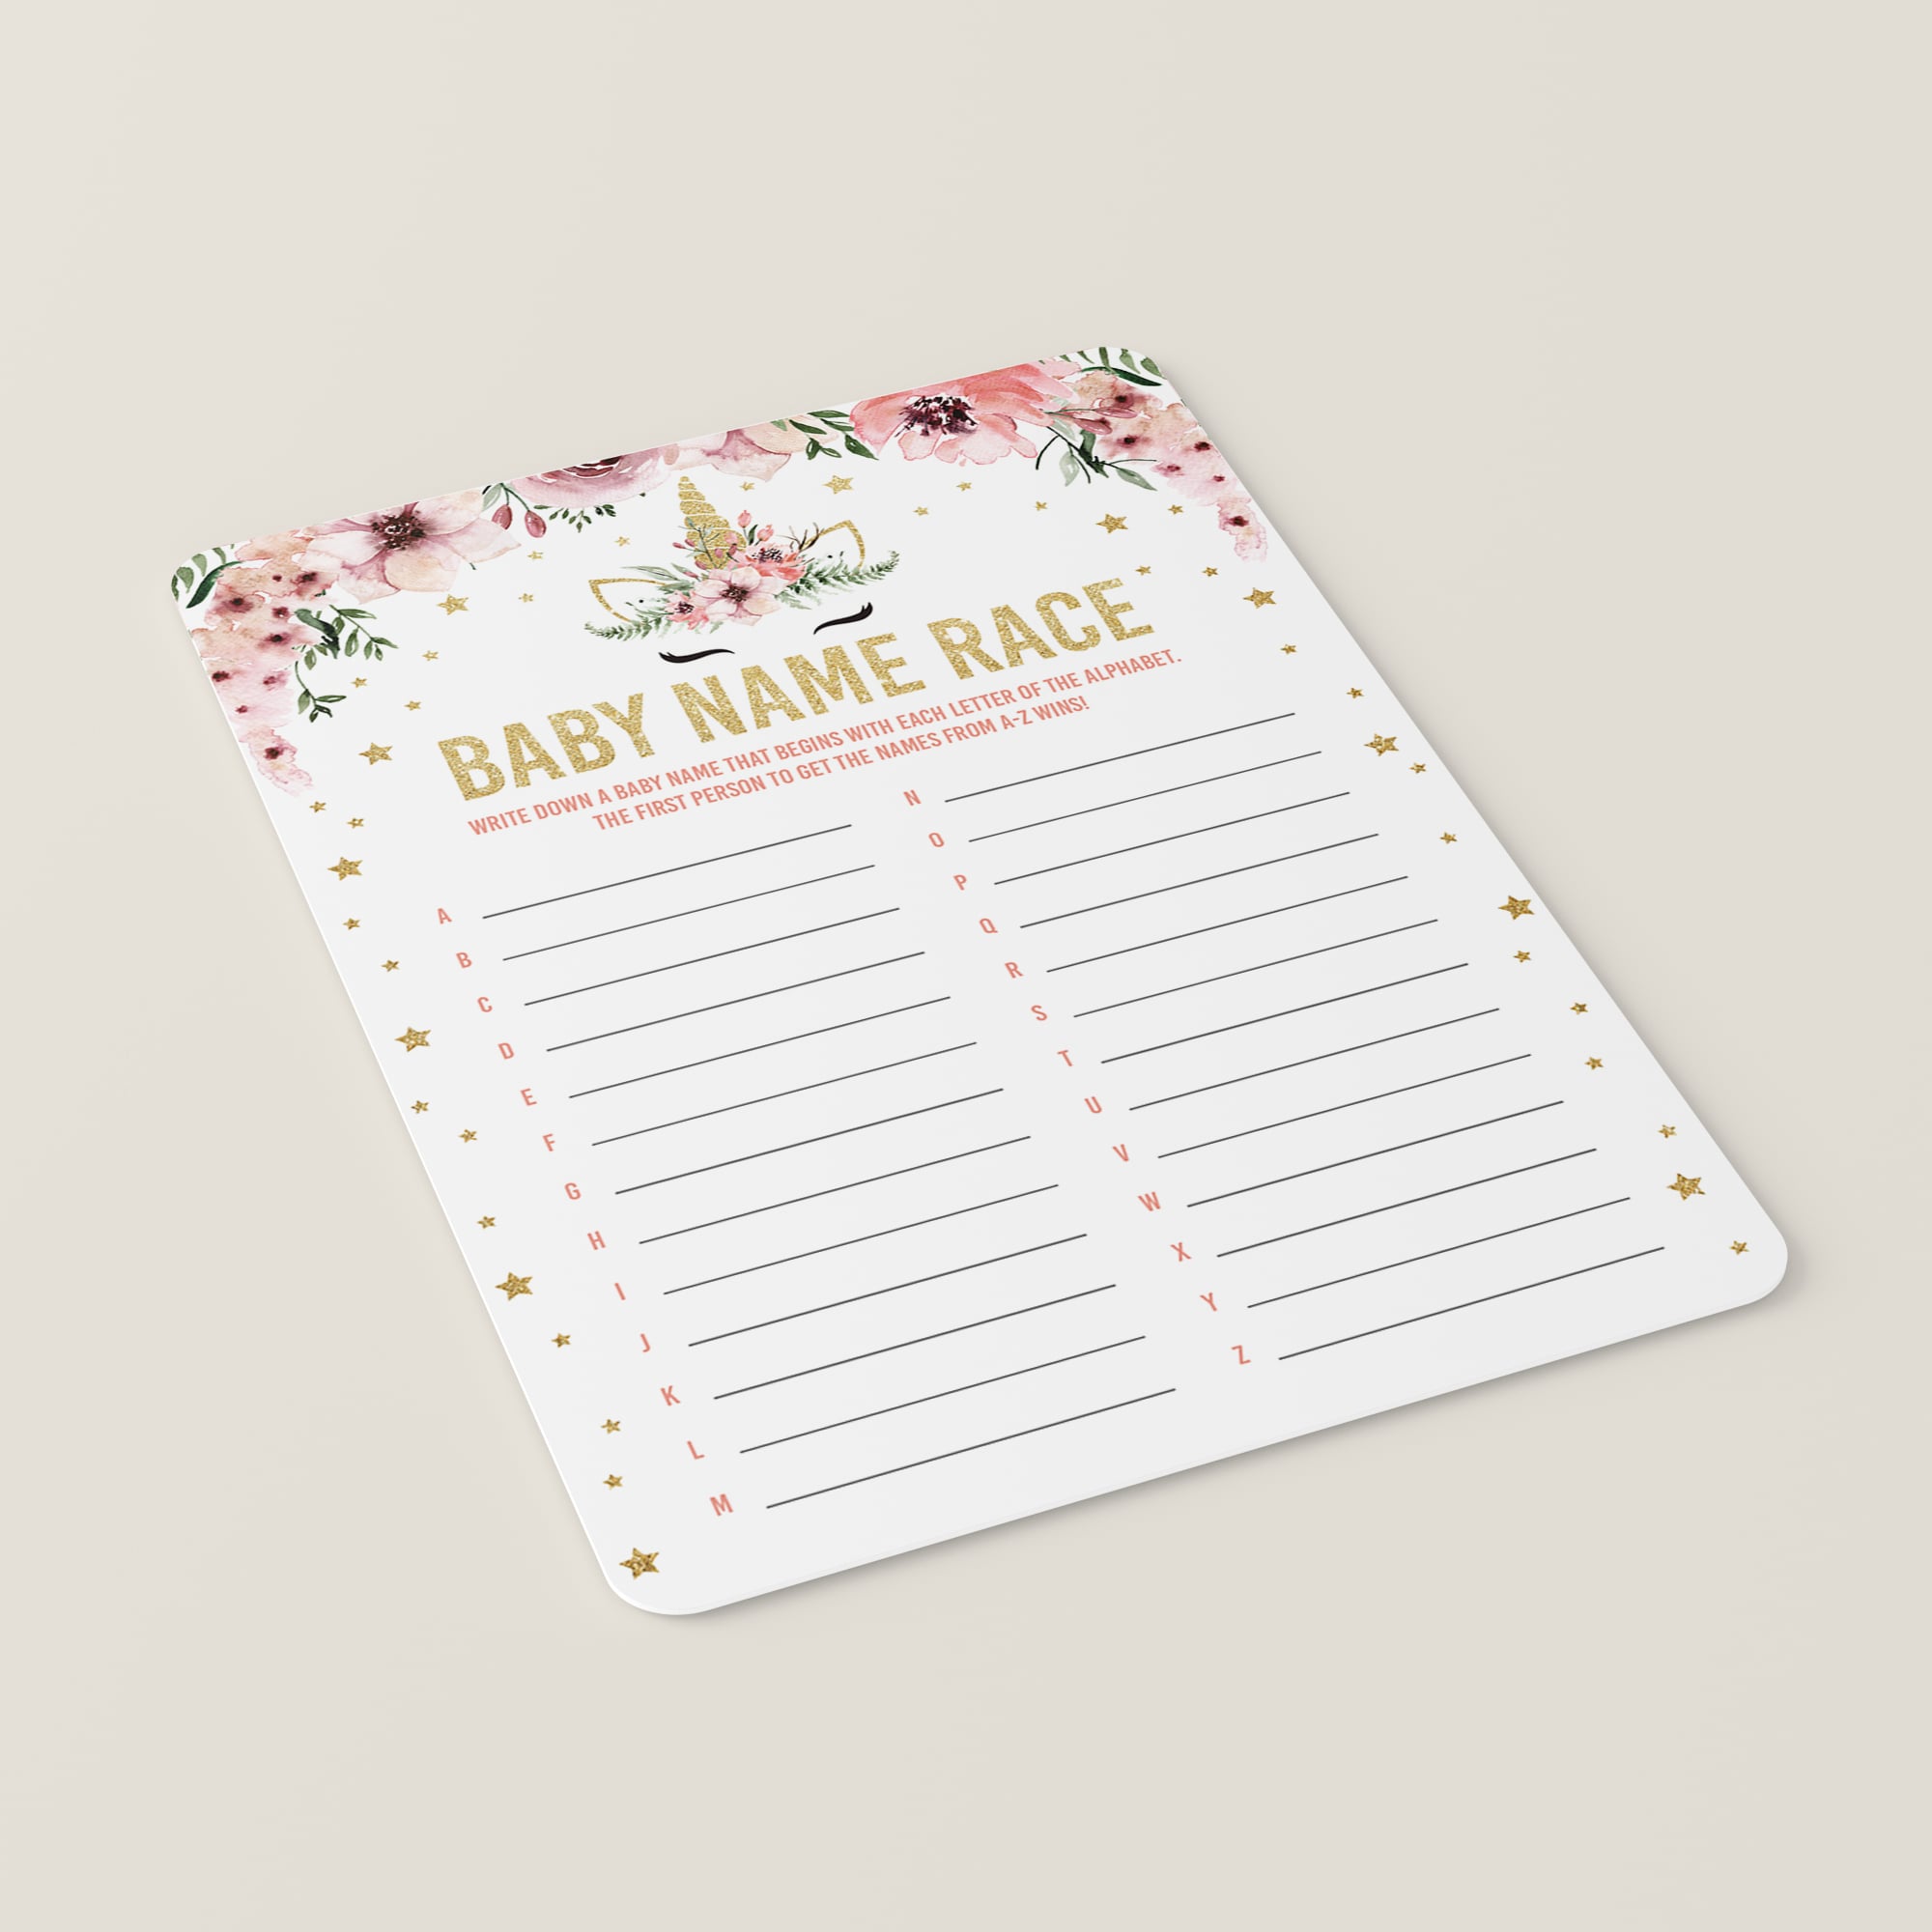 Baby shower name race game for girls by LittleSizzle